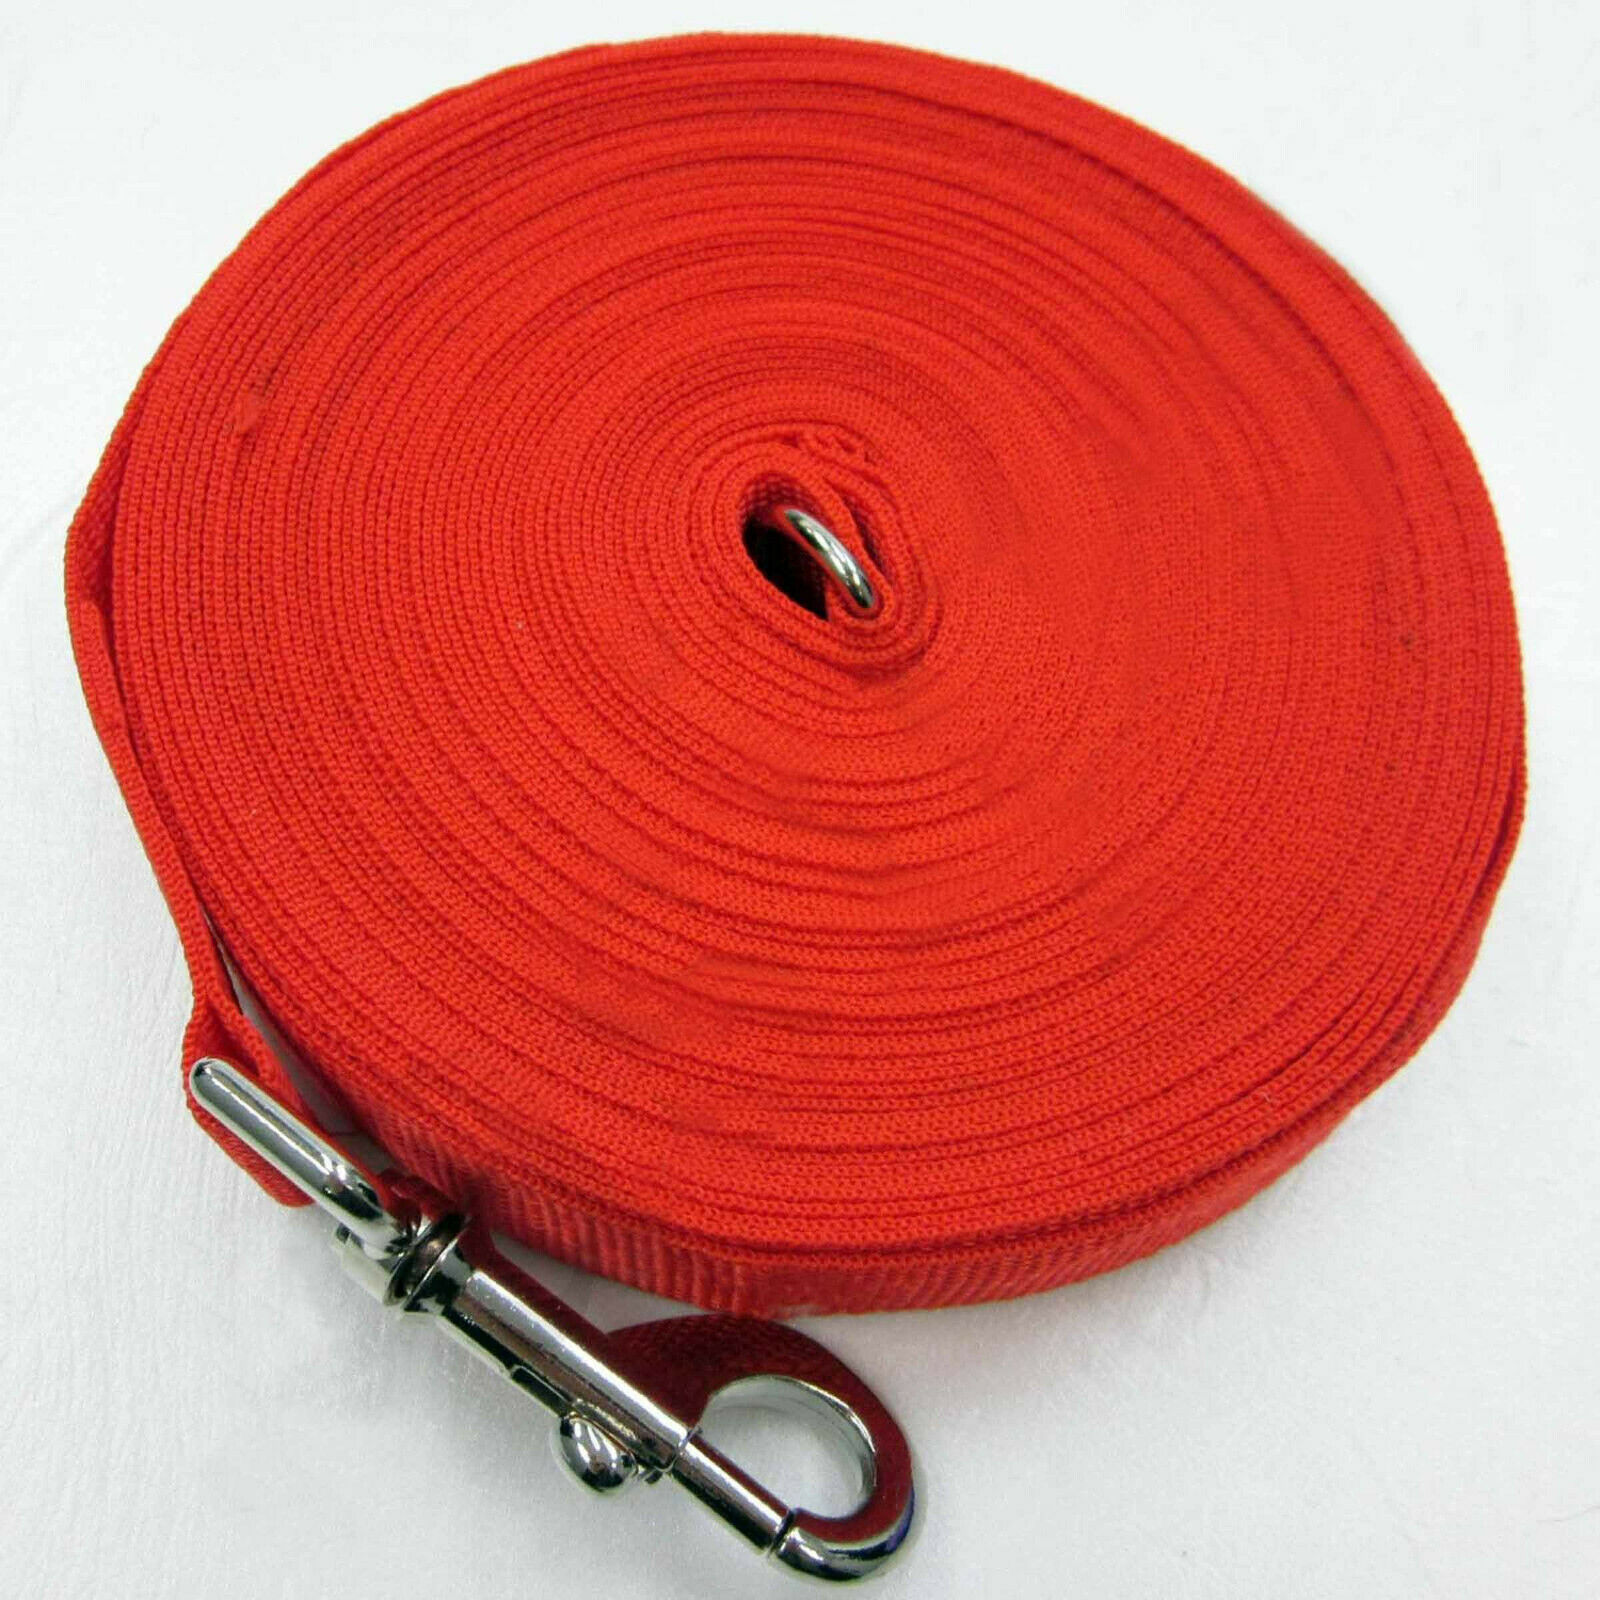 Red Dog Pet Puppy Training Lead Leash 50ft 15m Long Obedience Recall 1 Inch Wide